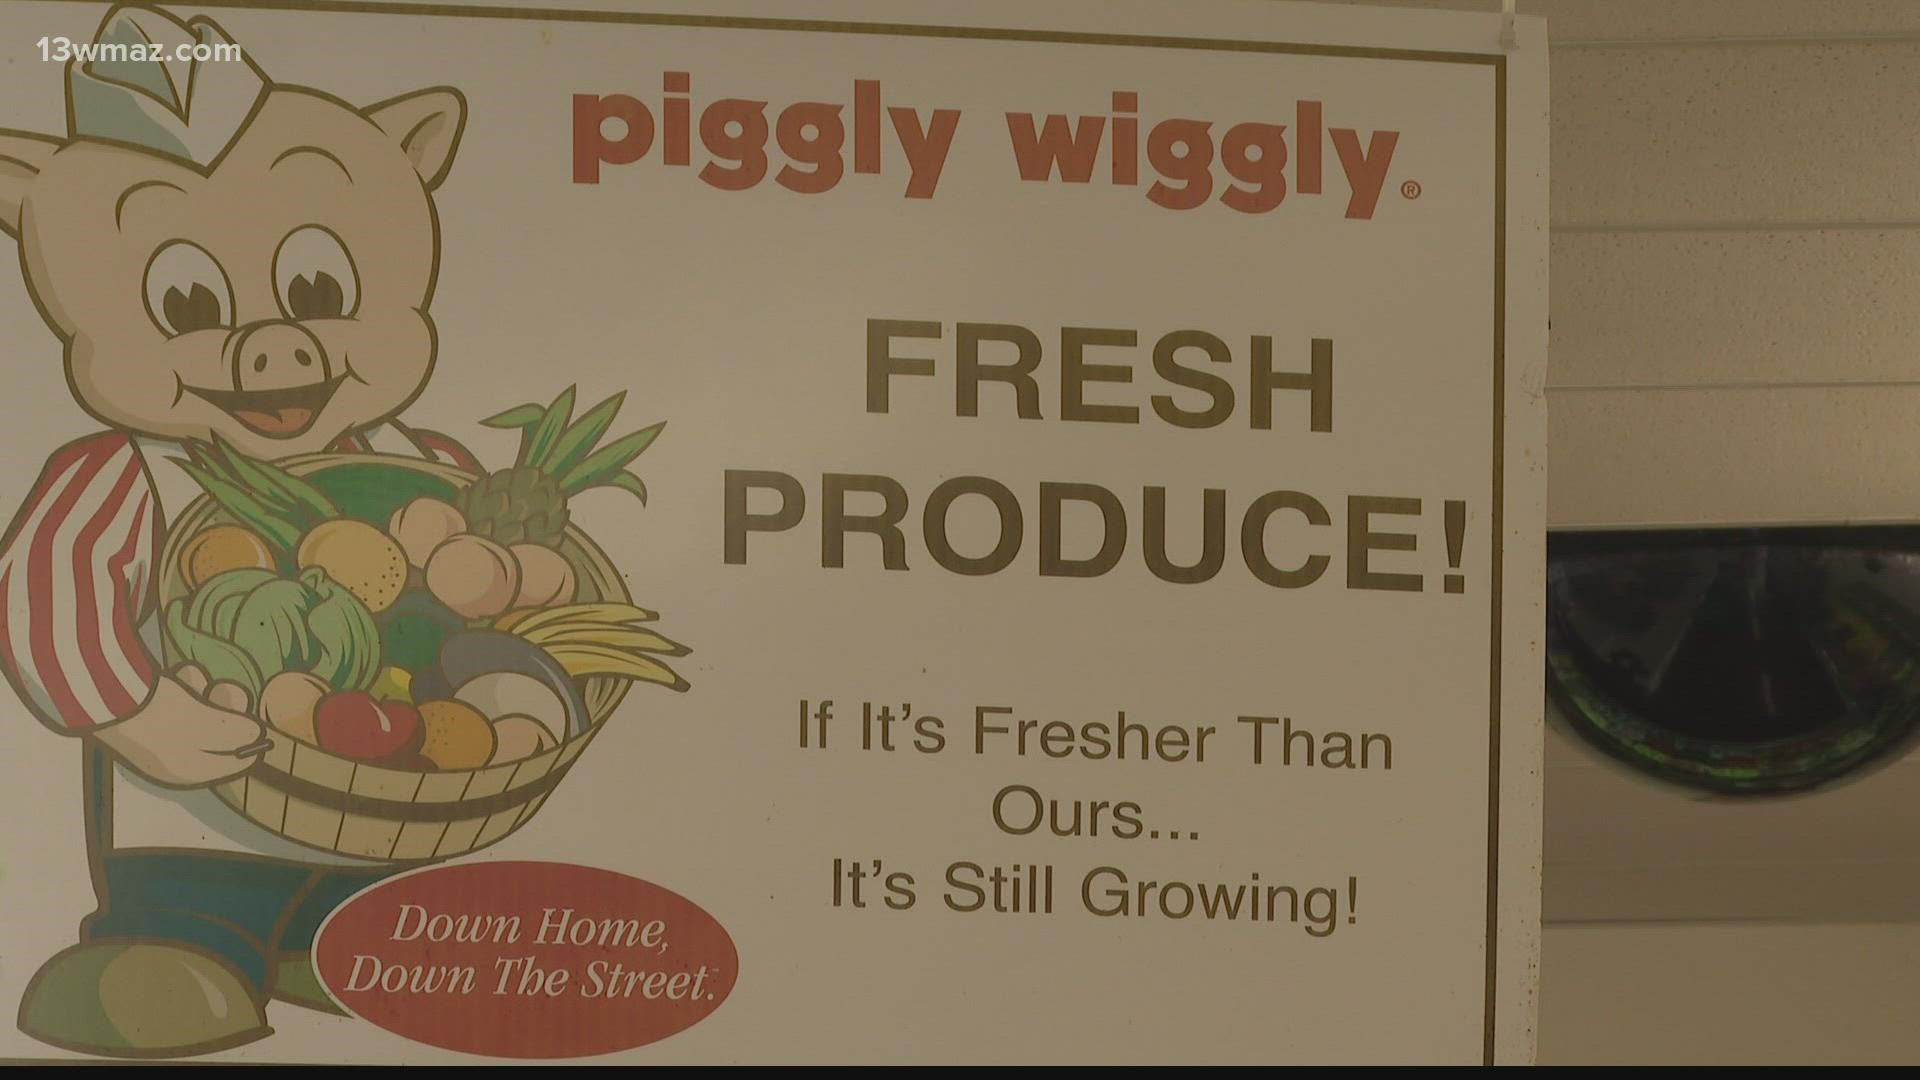 The Piggly Wiggly had to close for a month due to health code violations. Management blamed major problems with the refrigeration system.